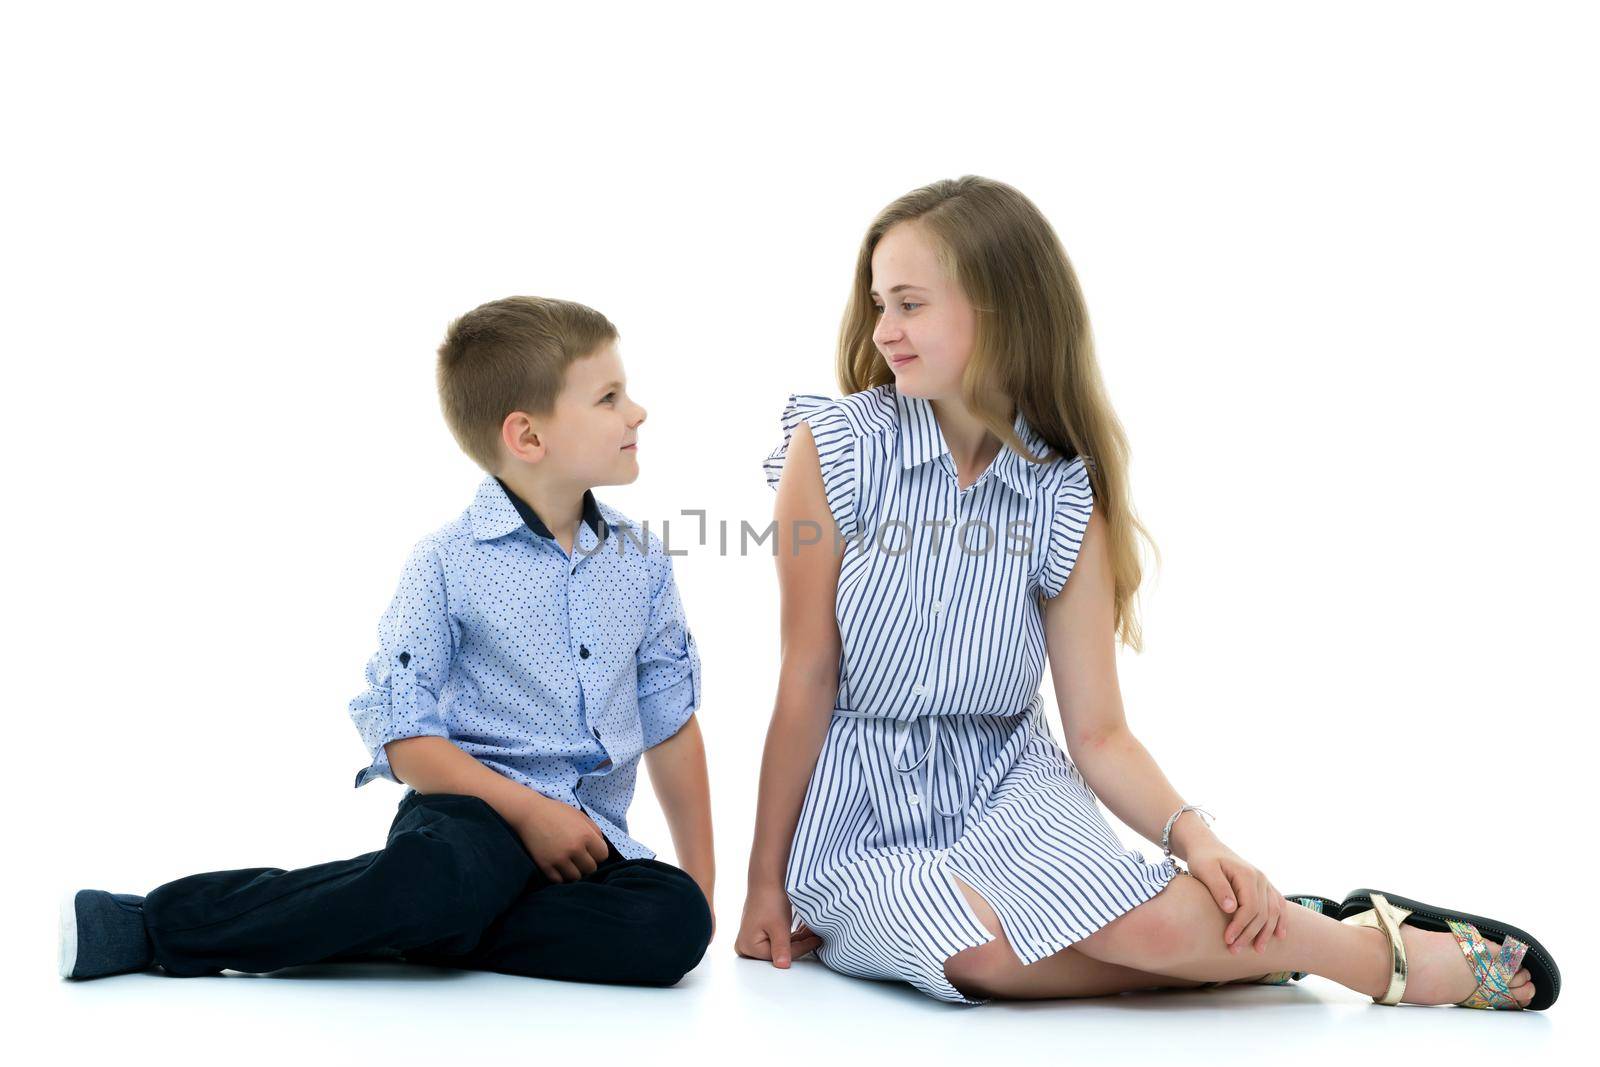 Boy and girl, brother and sister posing in the studio. Concept of family values, friendship, game. Isolated on white background